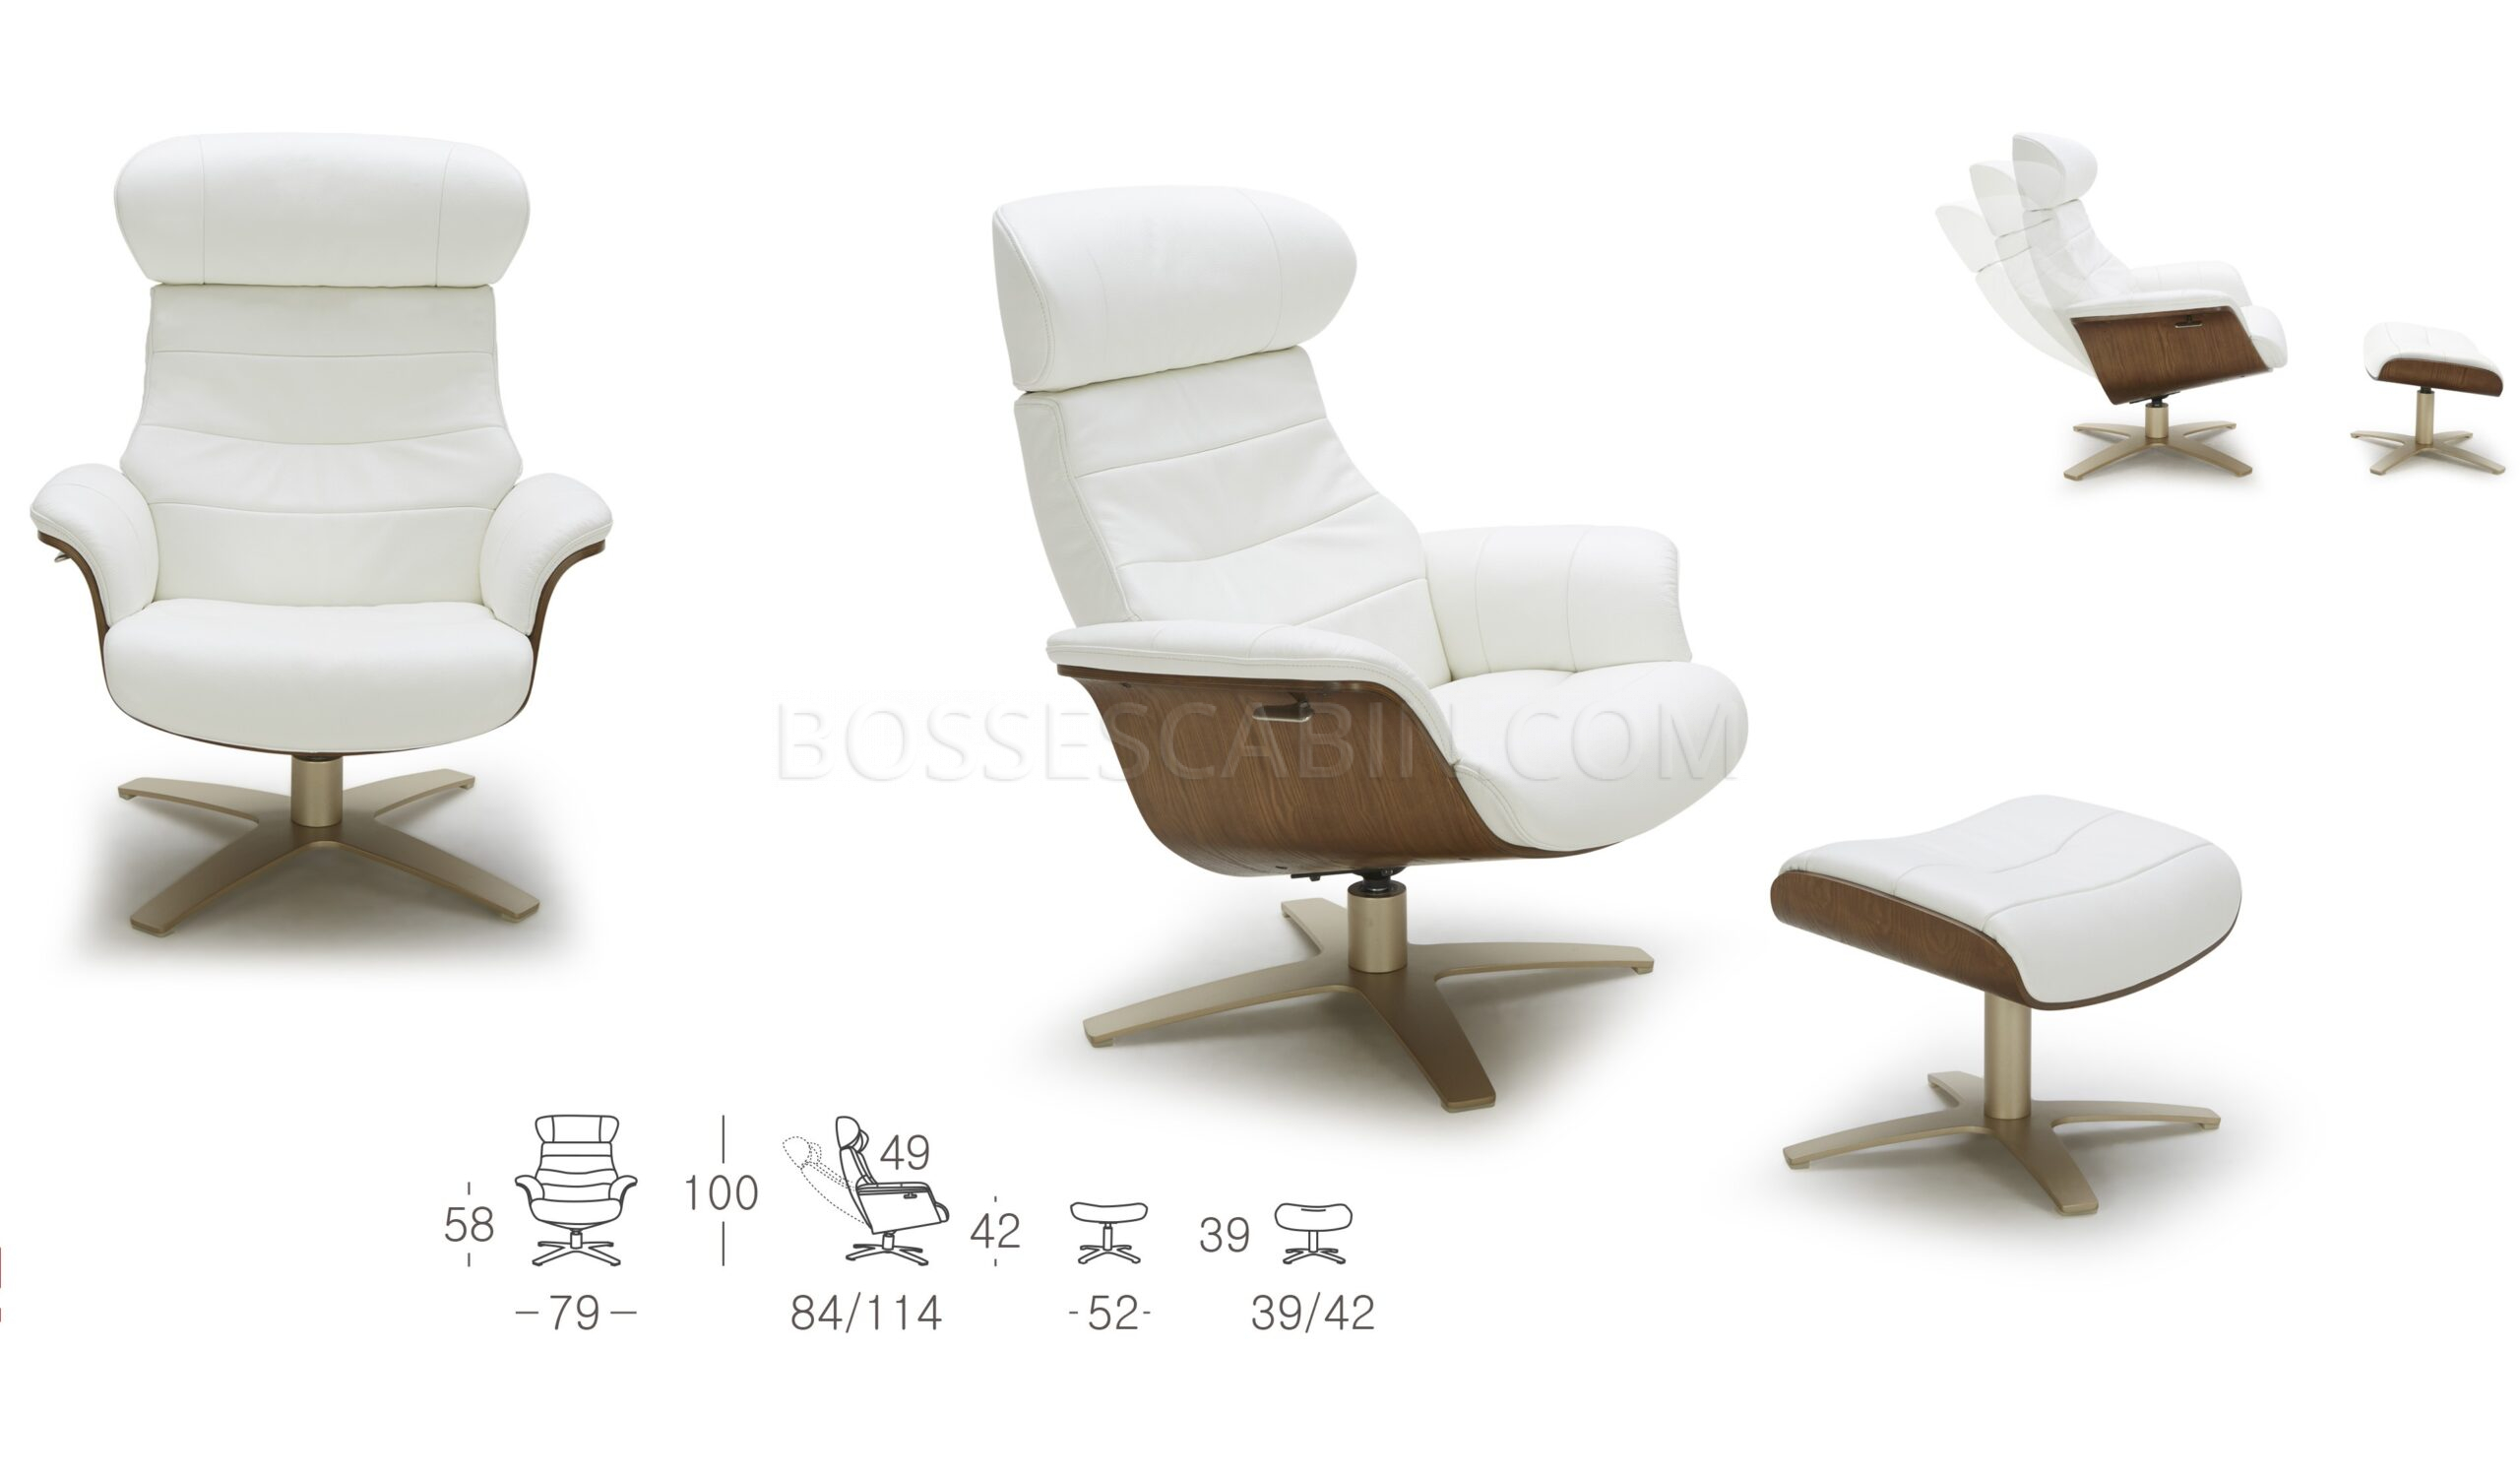 Reclining Chair And Ottoman Leather, Reclining Chair With Ottoman Leather